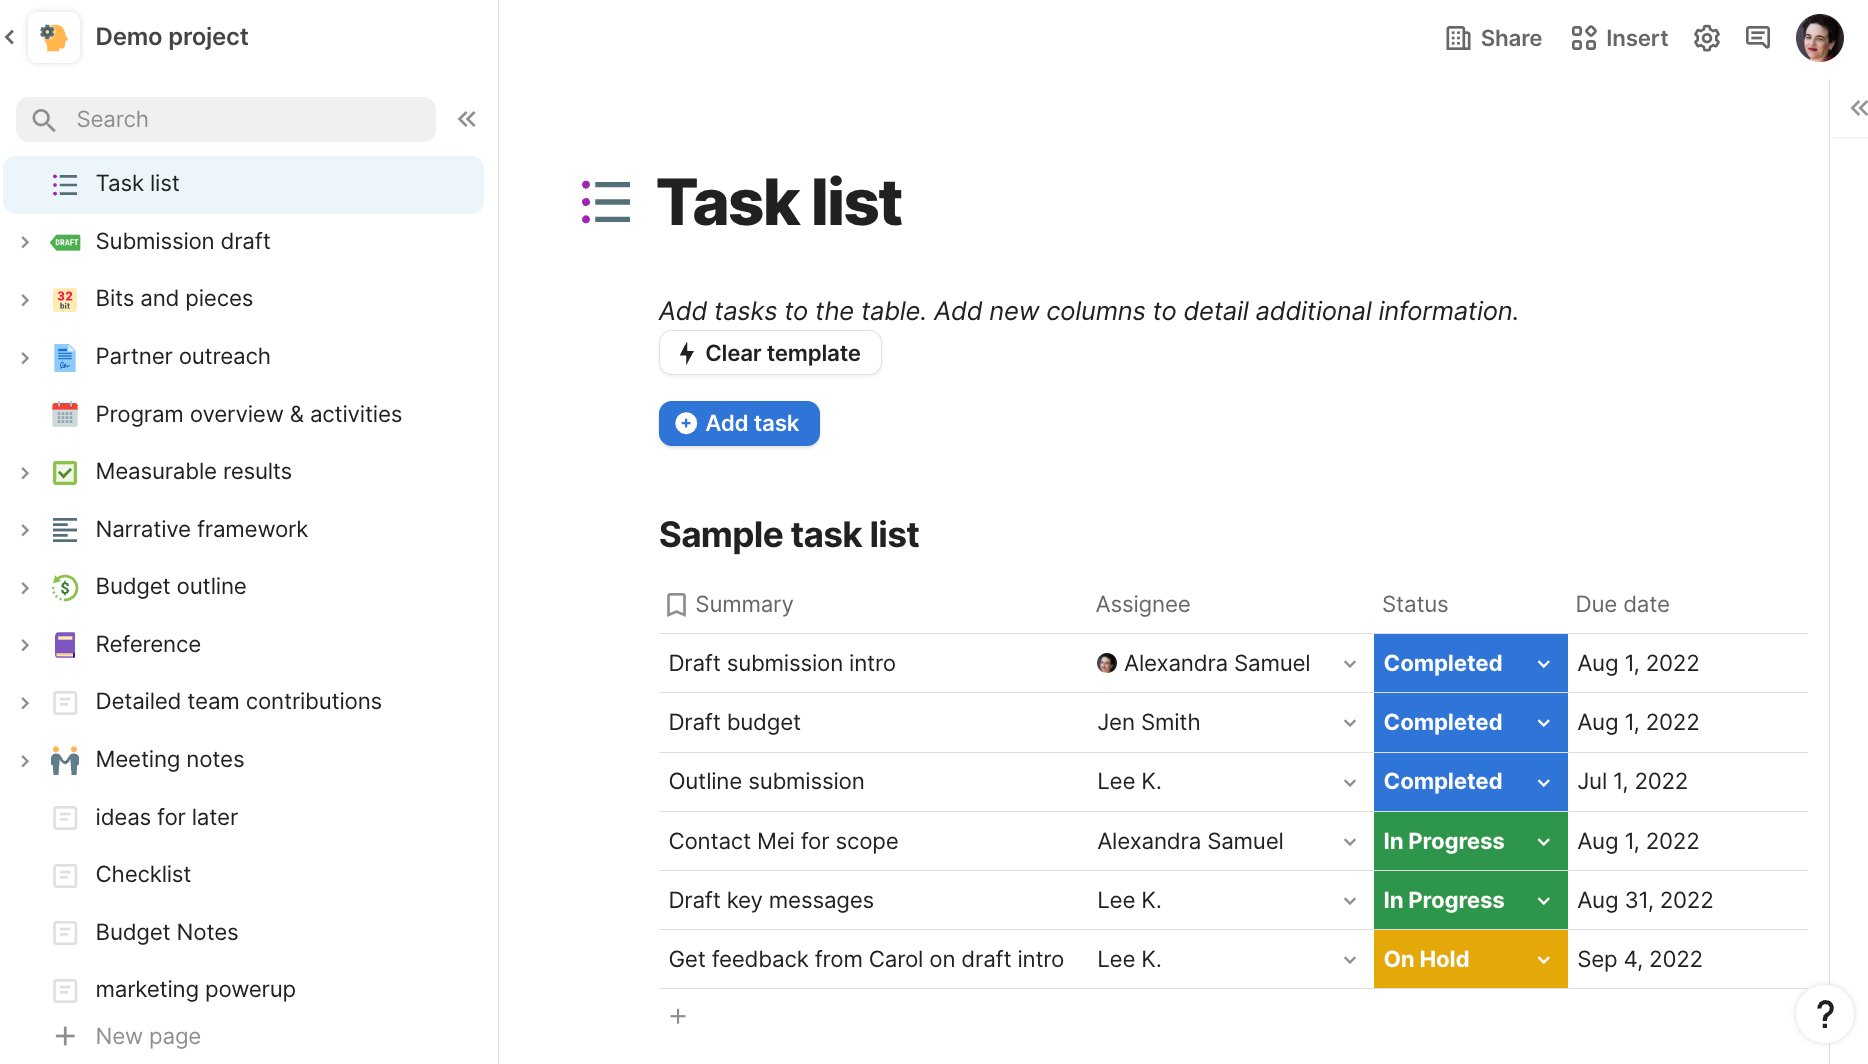 Screenshot of task list in main window with sidebar links to other project-related pages